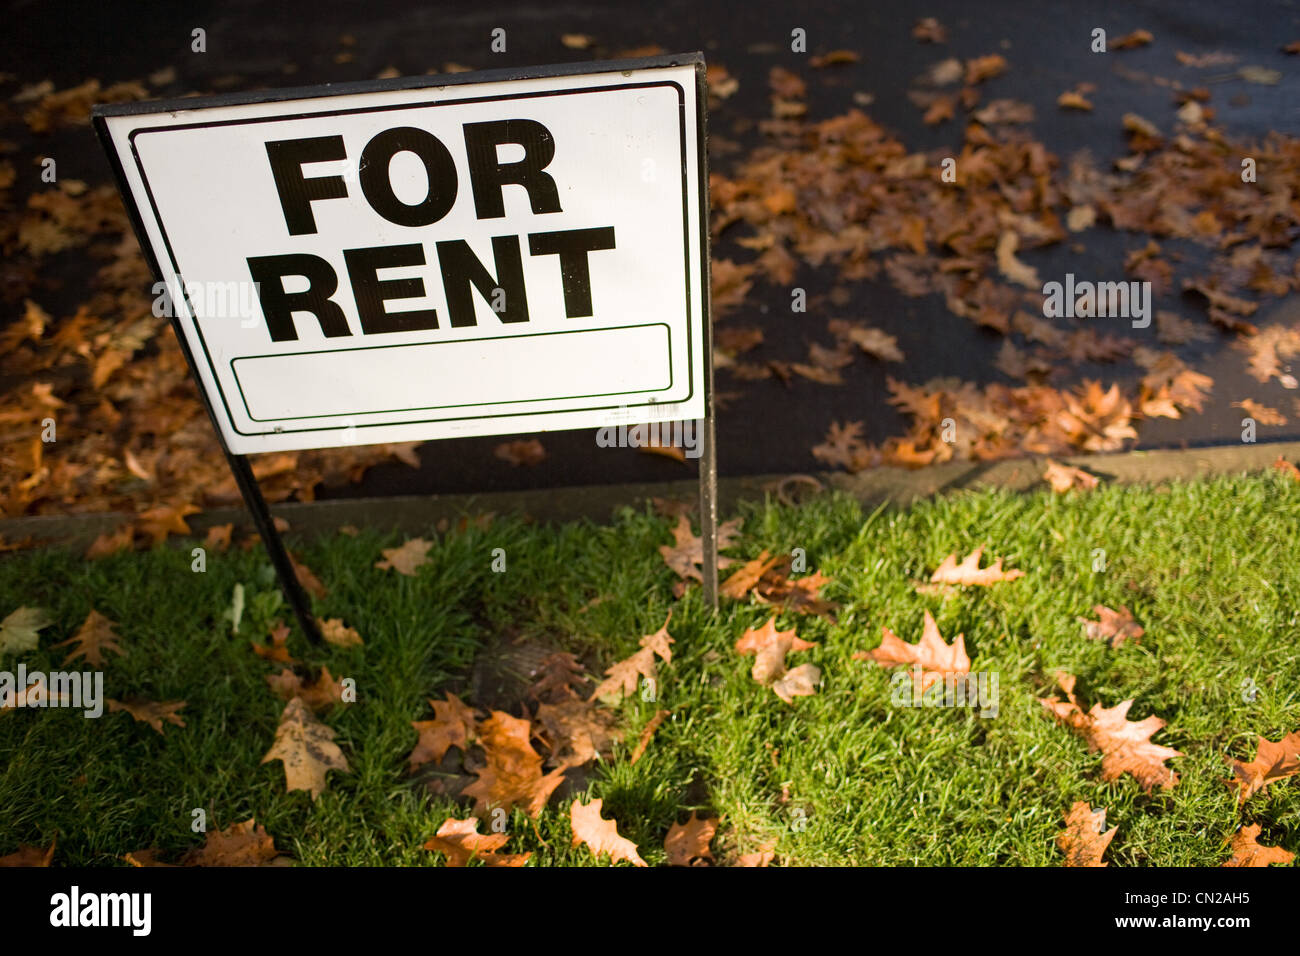 For rent sign on grass Stock Photo